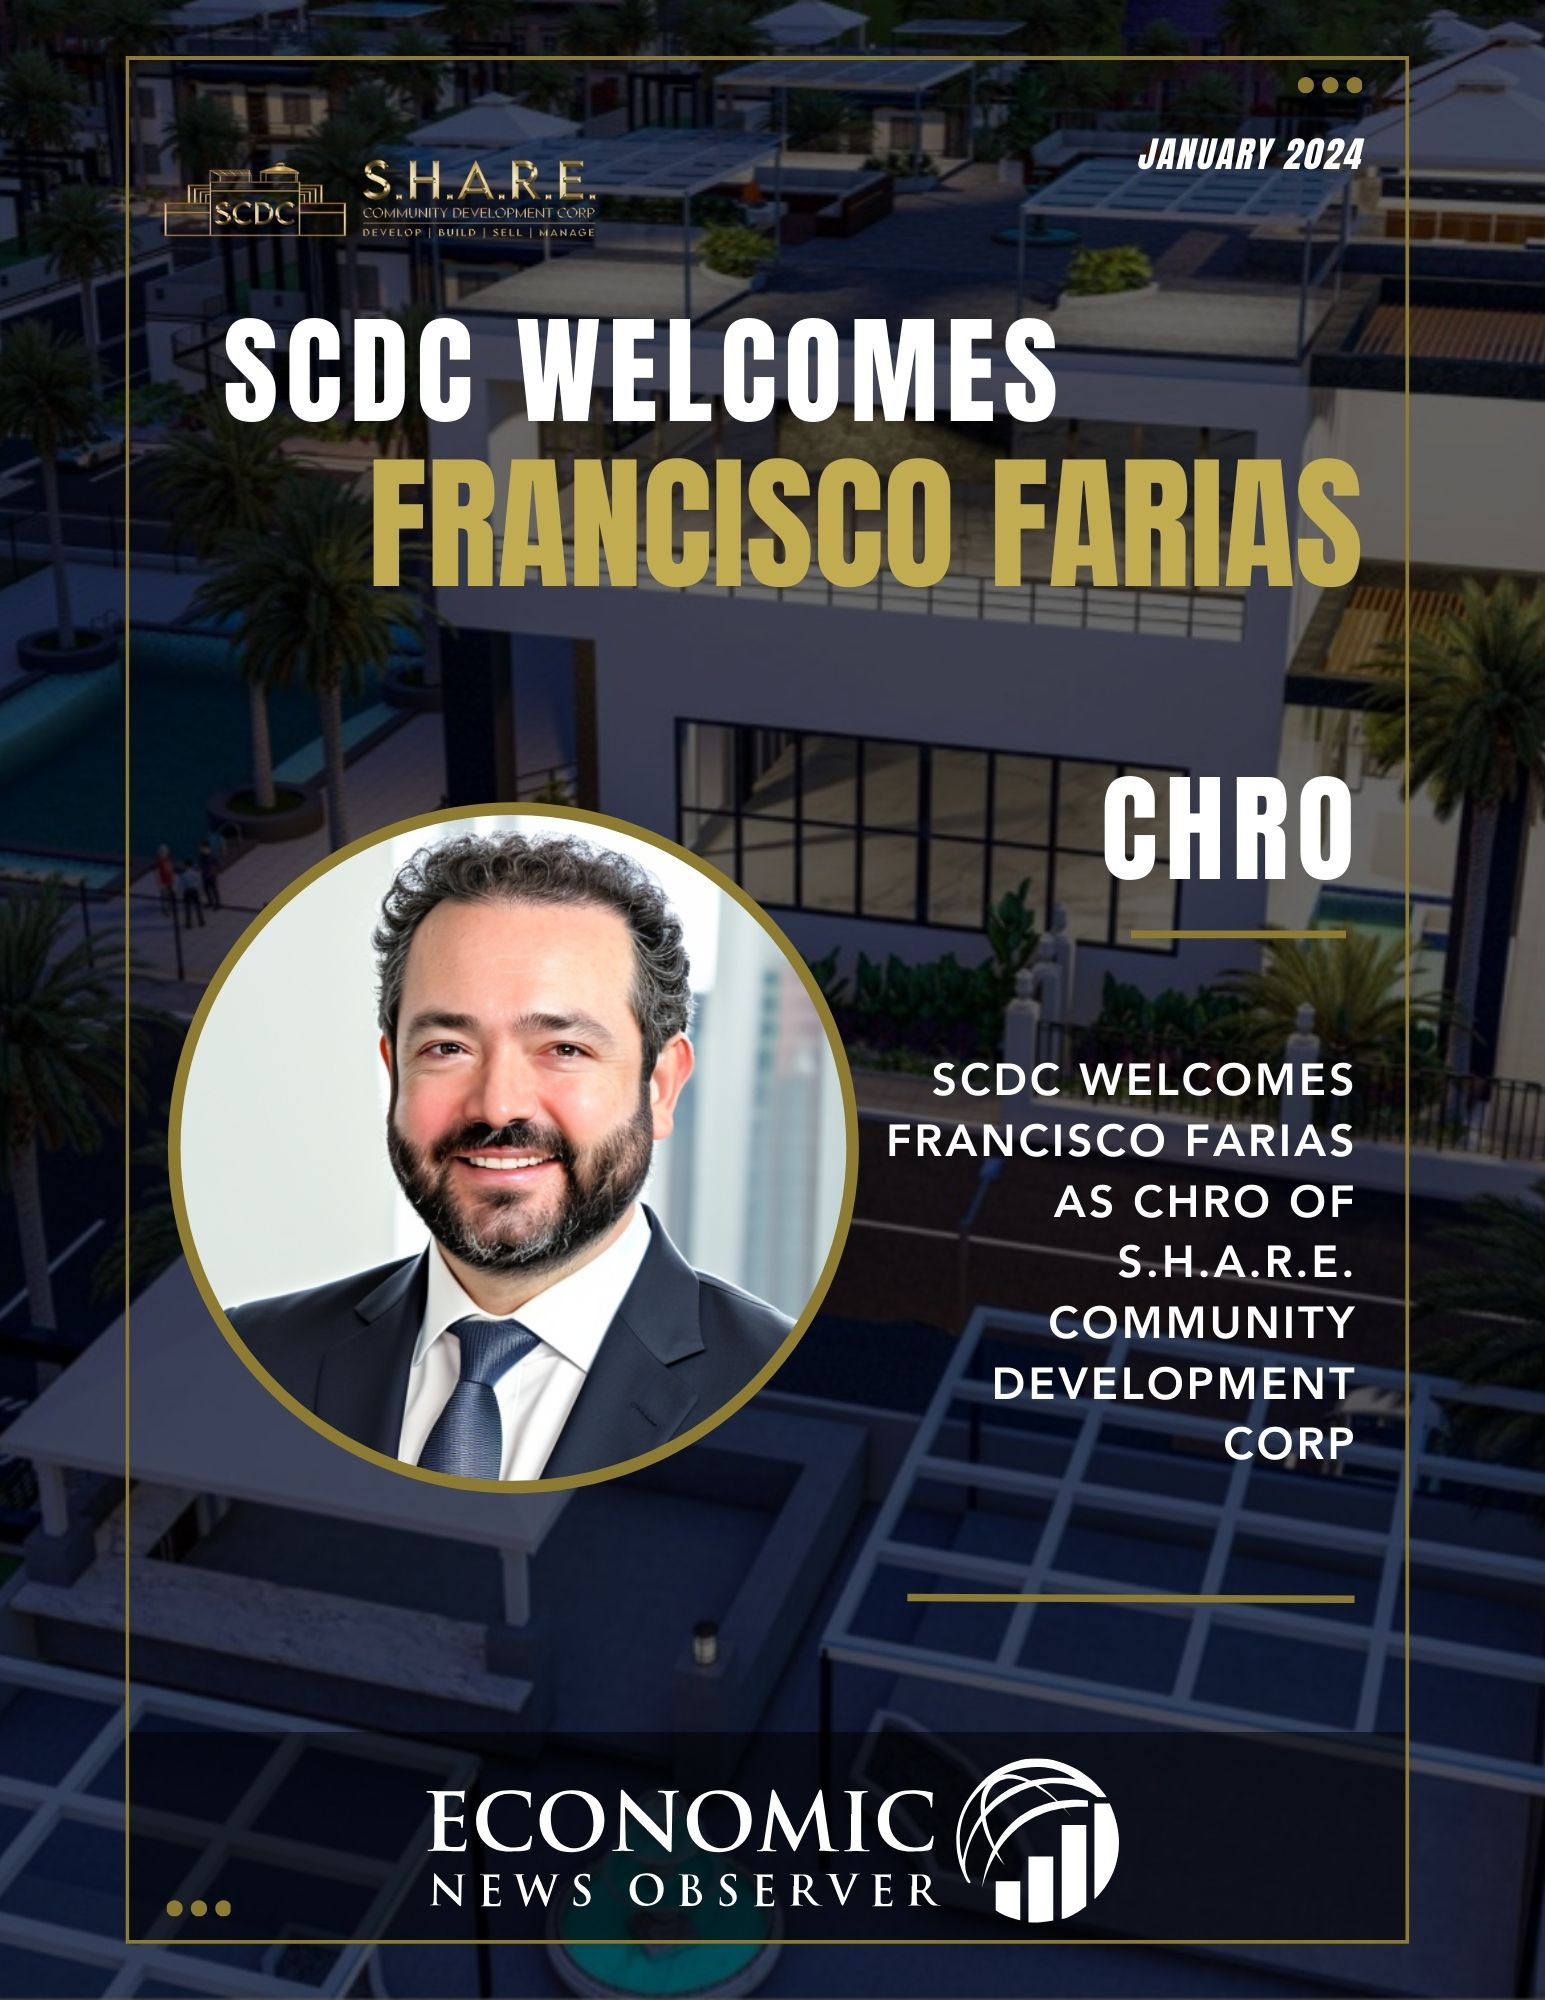 S.H.A.R.E. Community Development Corp (SCDC) Proudly Announces Francisco Farias as the Chief Human Resources Officer